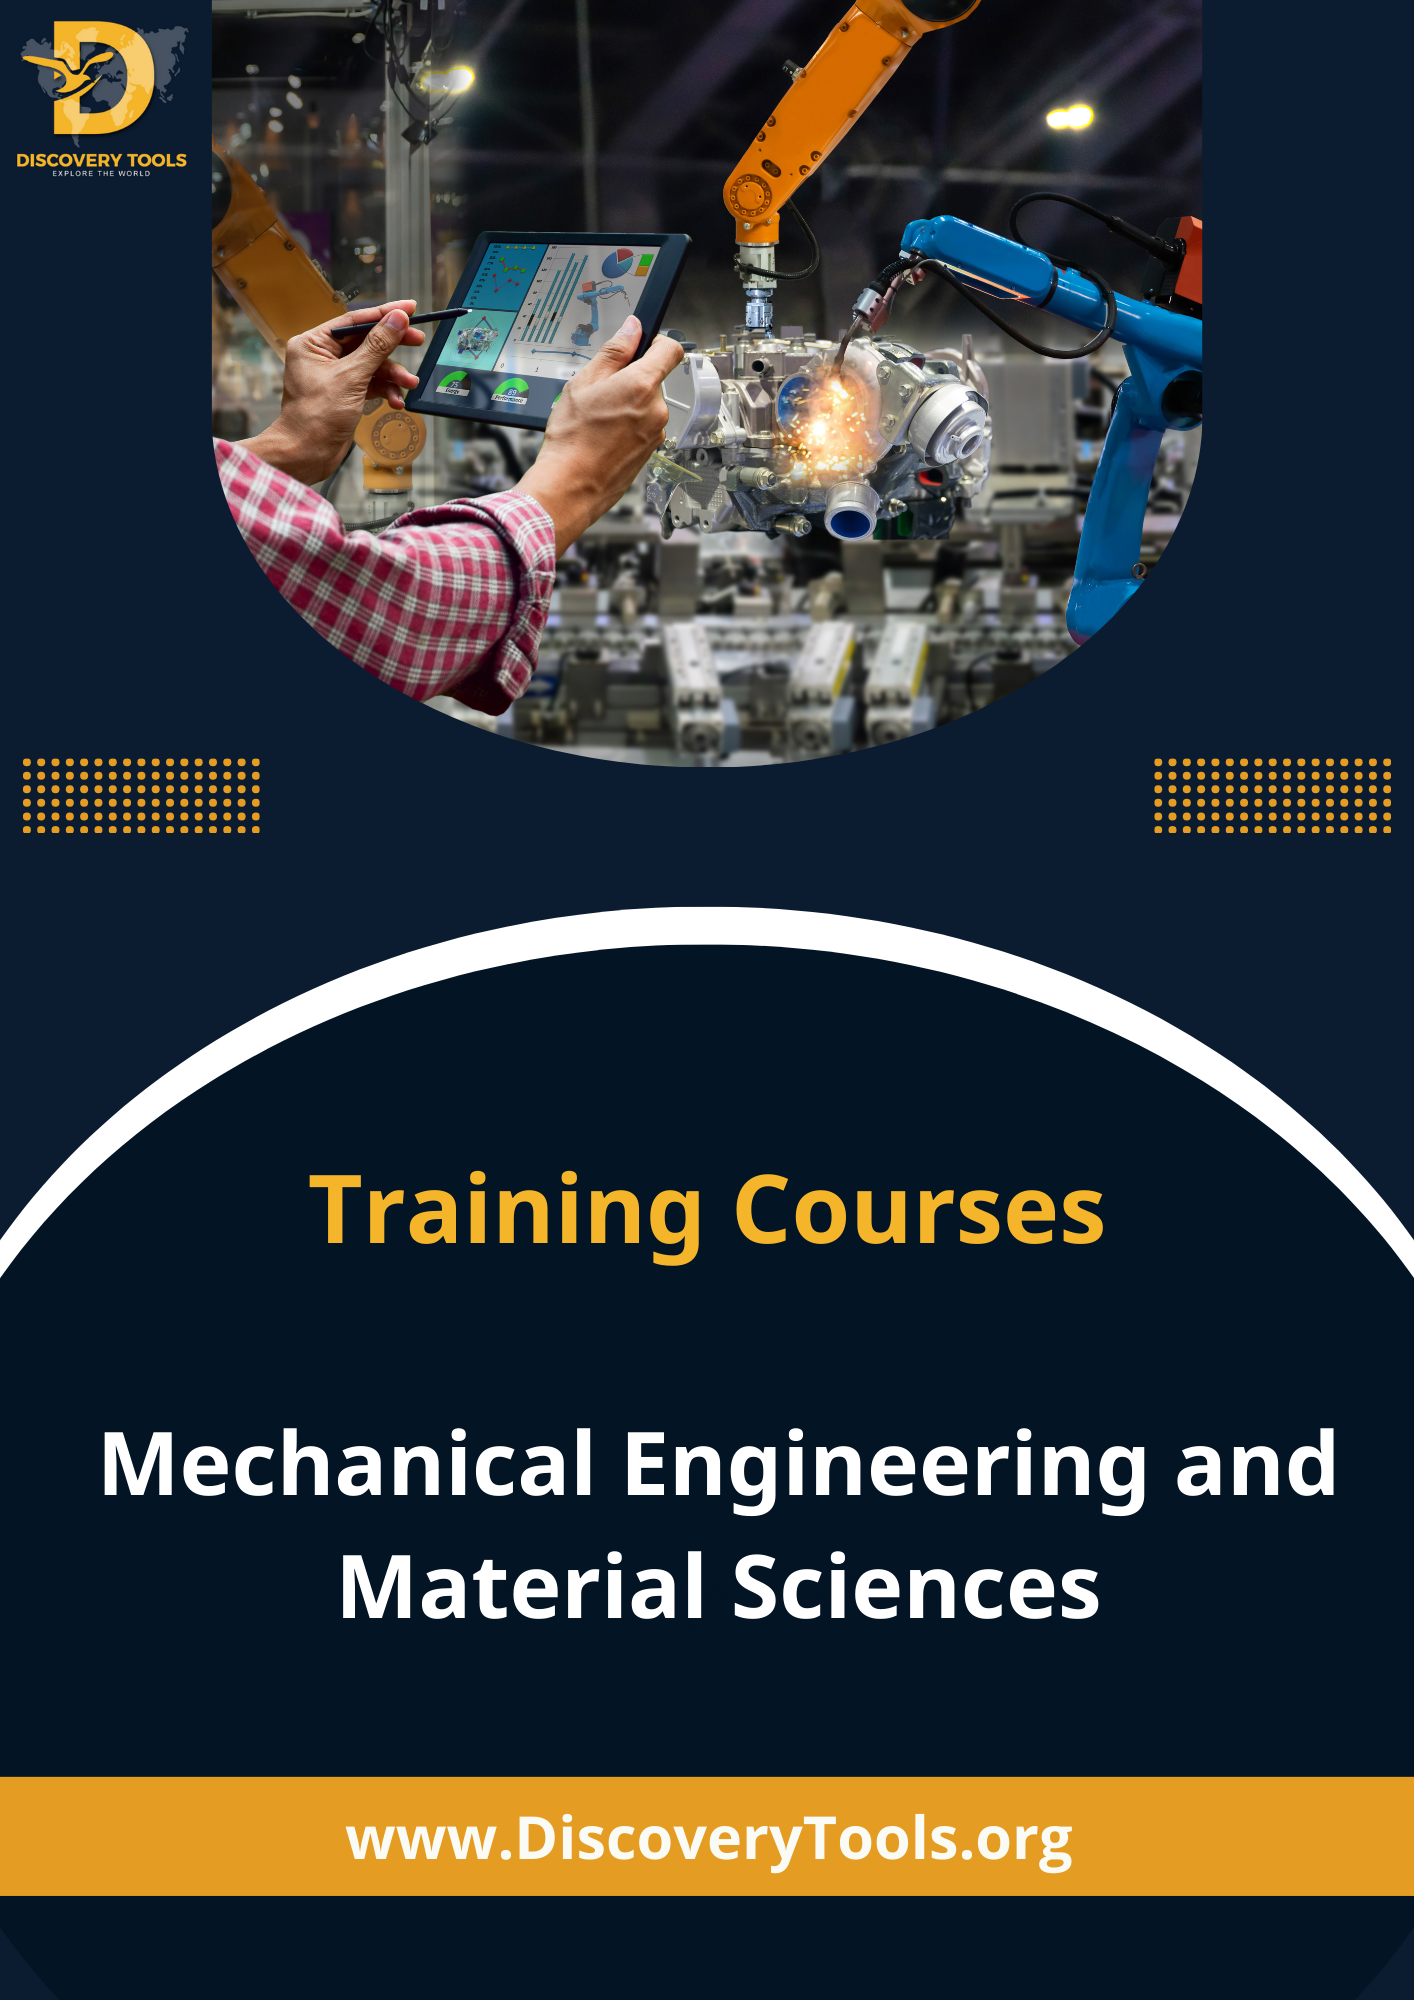 Mechanical Engineering and Material Sciences